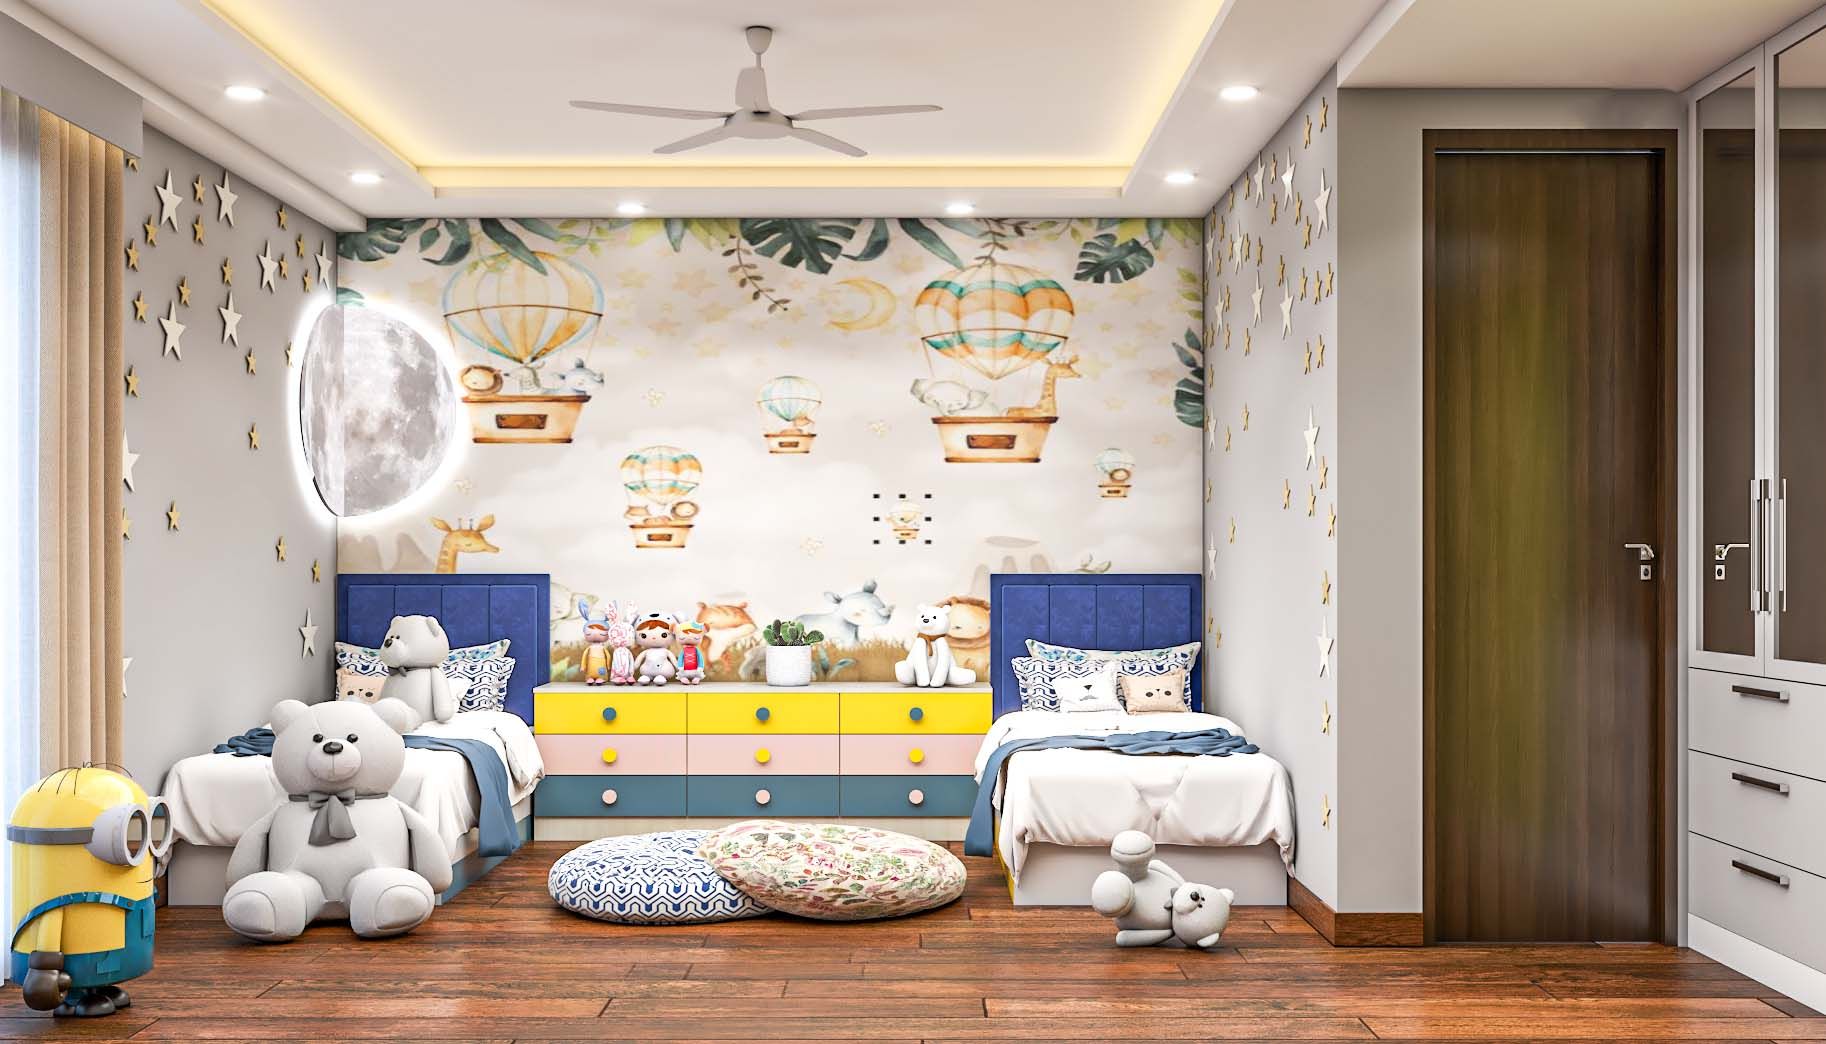 Modern Twin-Sharing Kid's Bedroom Design With Colourful Interiors